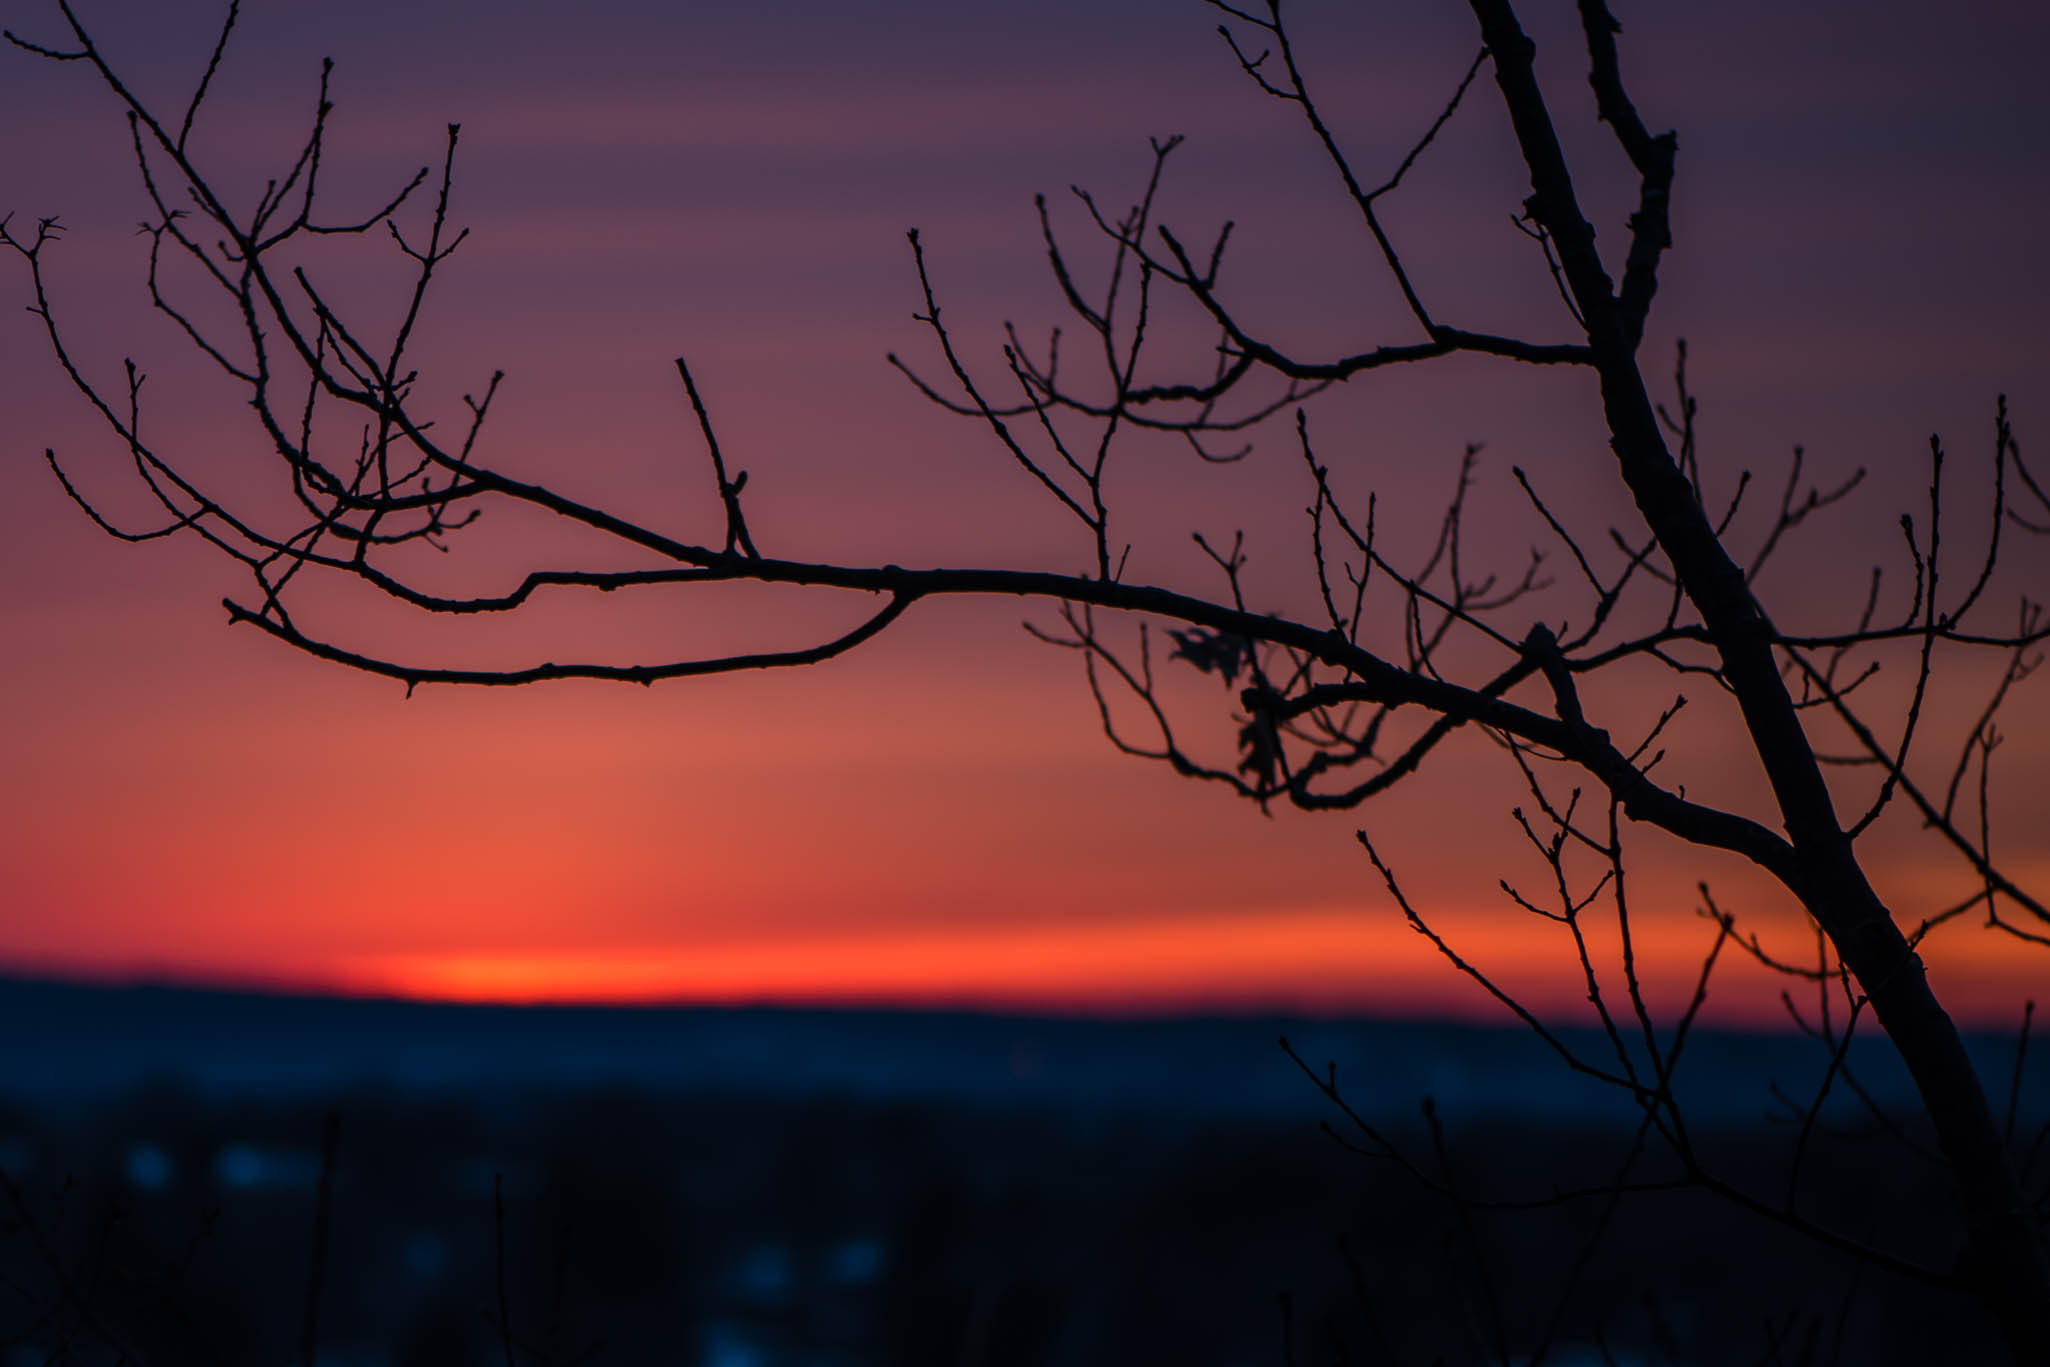 Sunset from East Rock Park in New Haven, Connecticut, USA